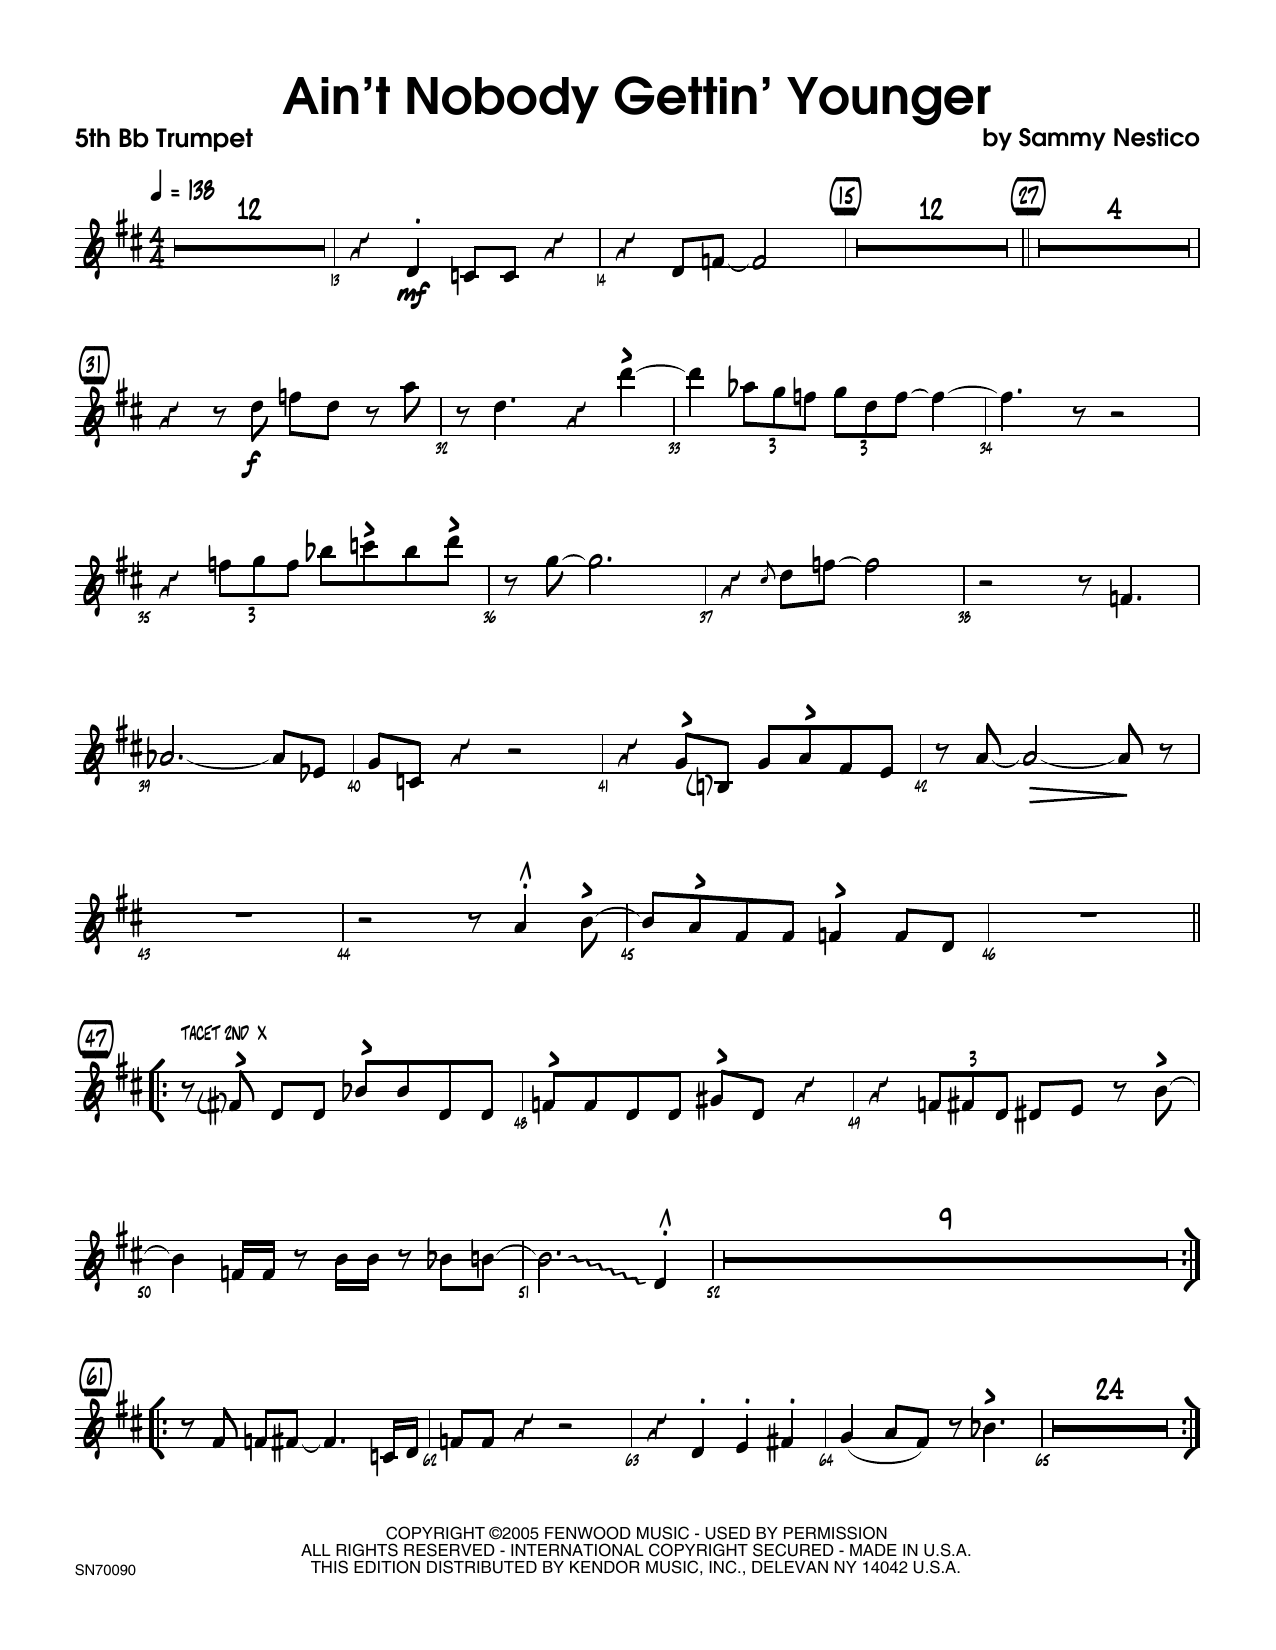 Download Sammy Nestico Ain't Nobody Gettin' Younger - 5th Bb T Sheet Music